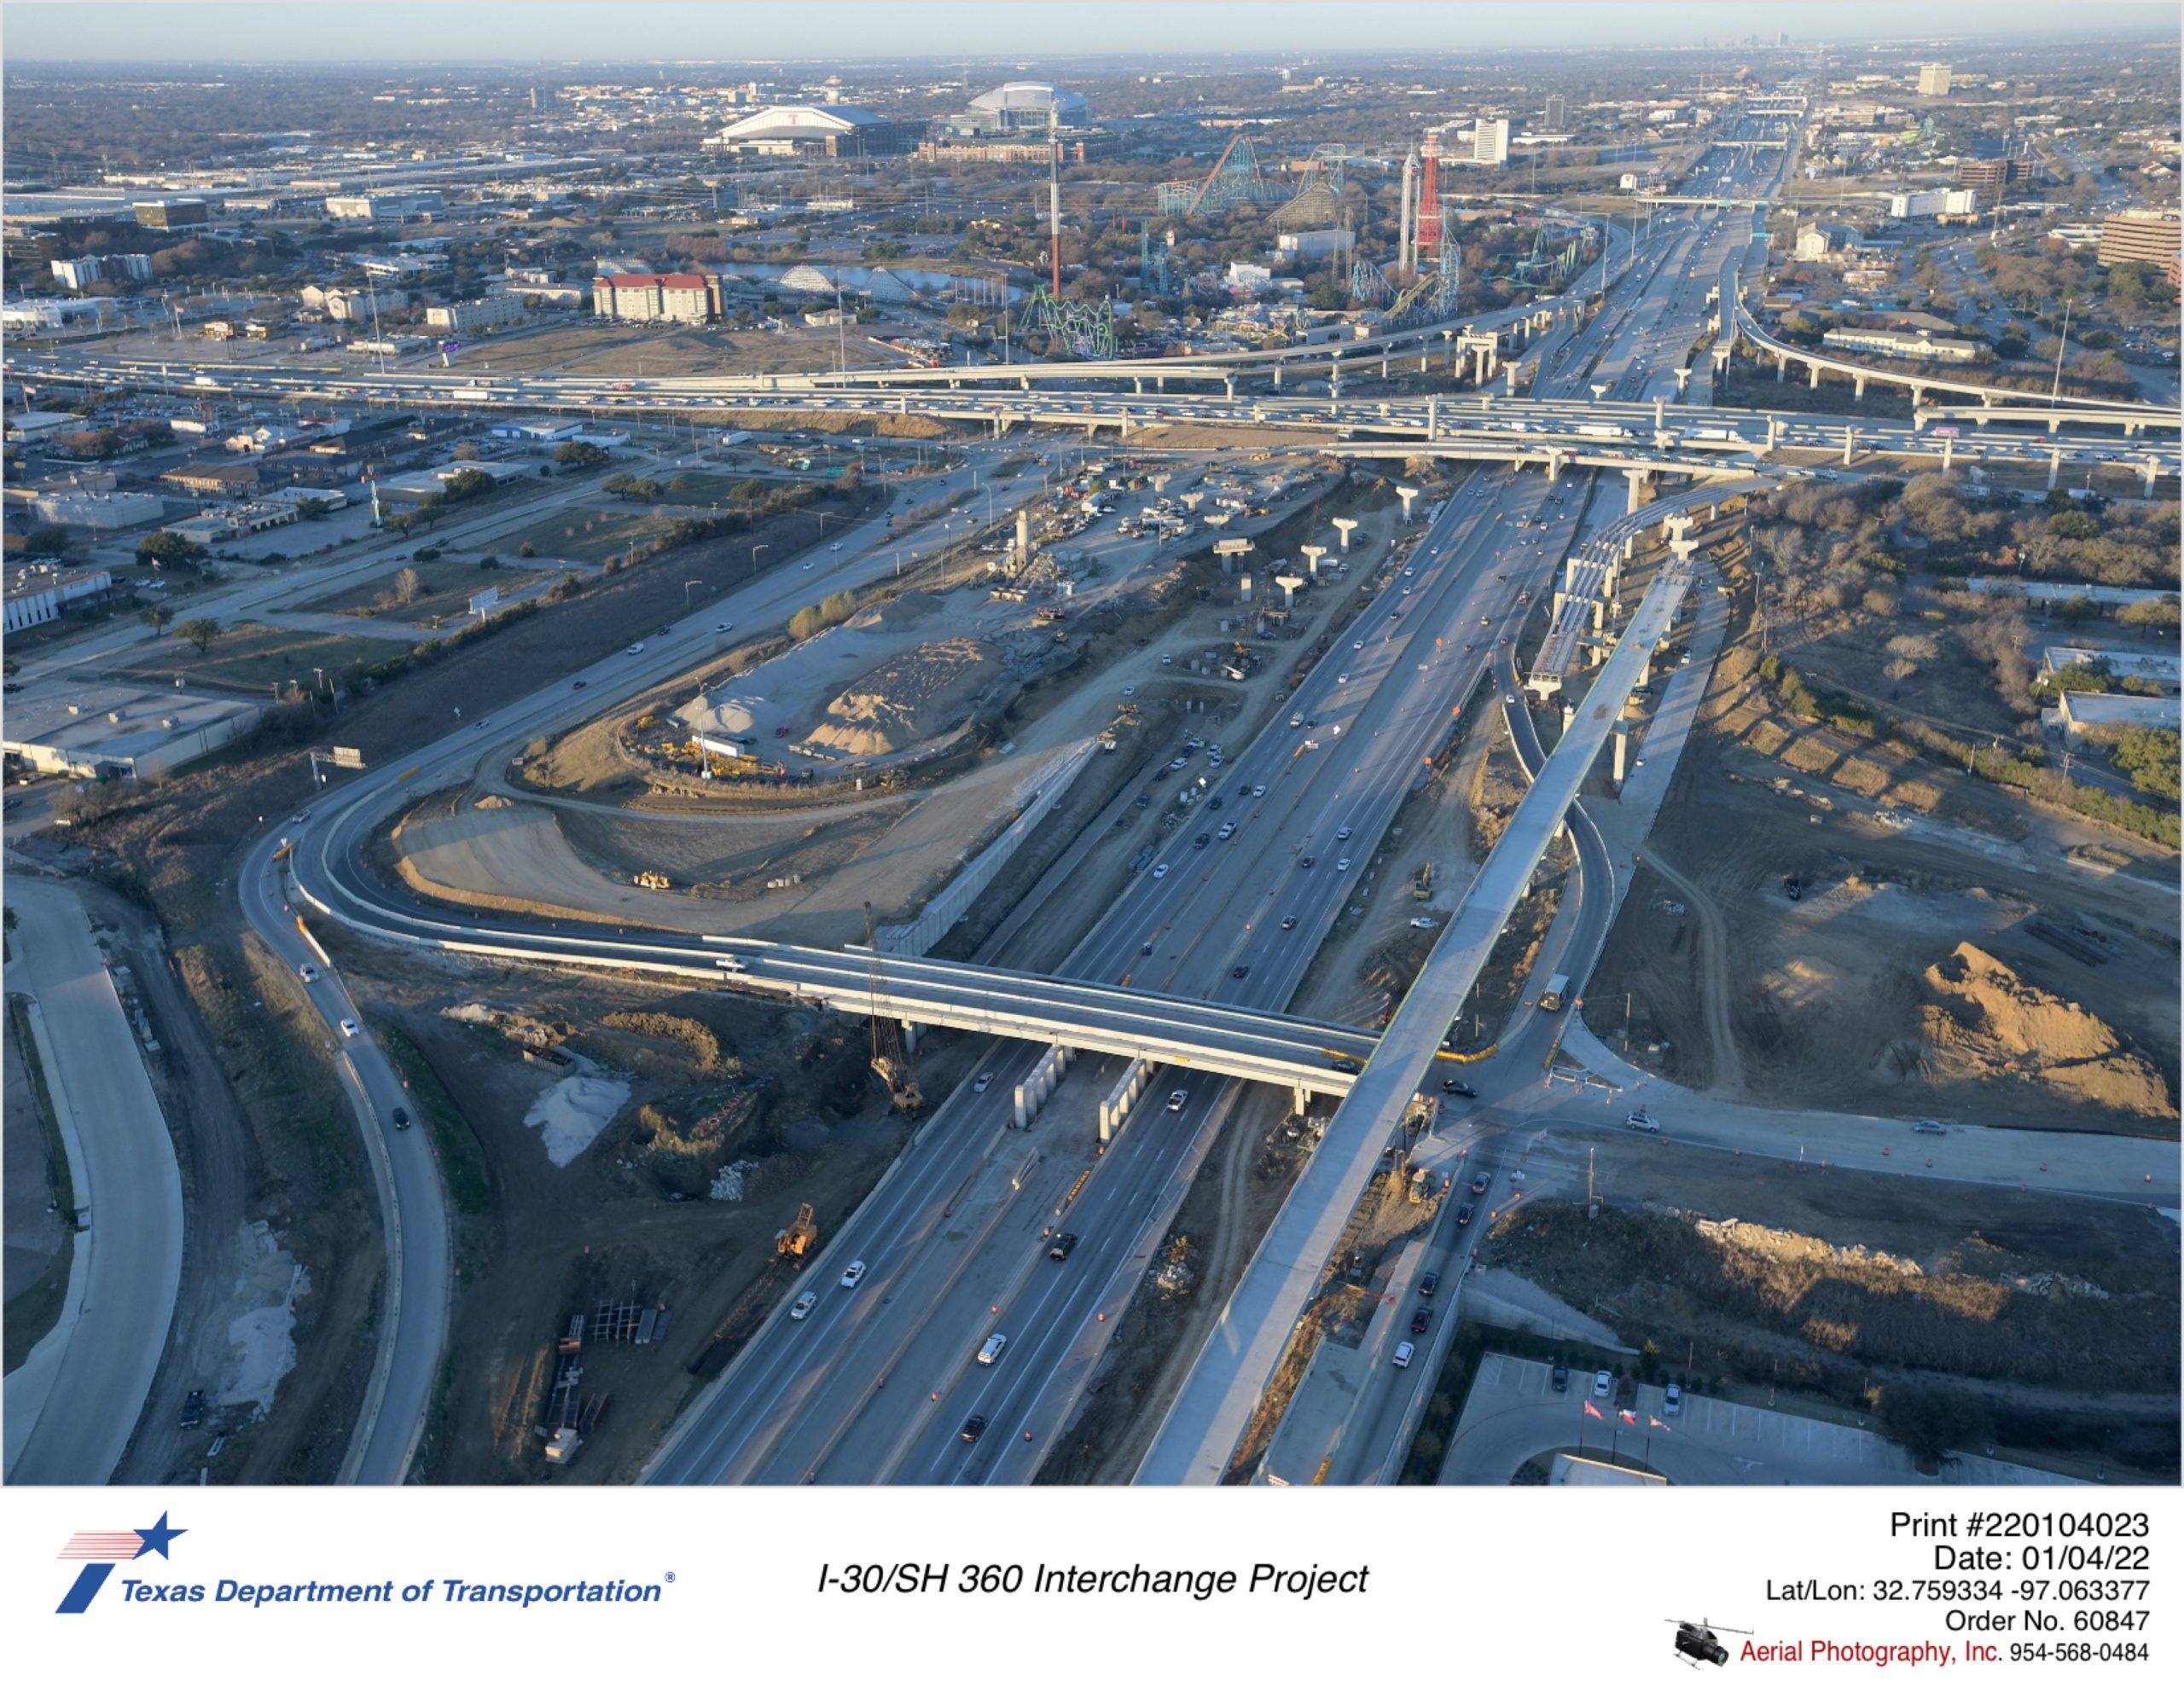 I-30/SH 360 interchange looking southwest over Six Flags Dr. Construction of east portion of Six Flags Dr bridge and direct connector bridge structures shown.